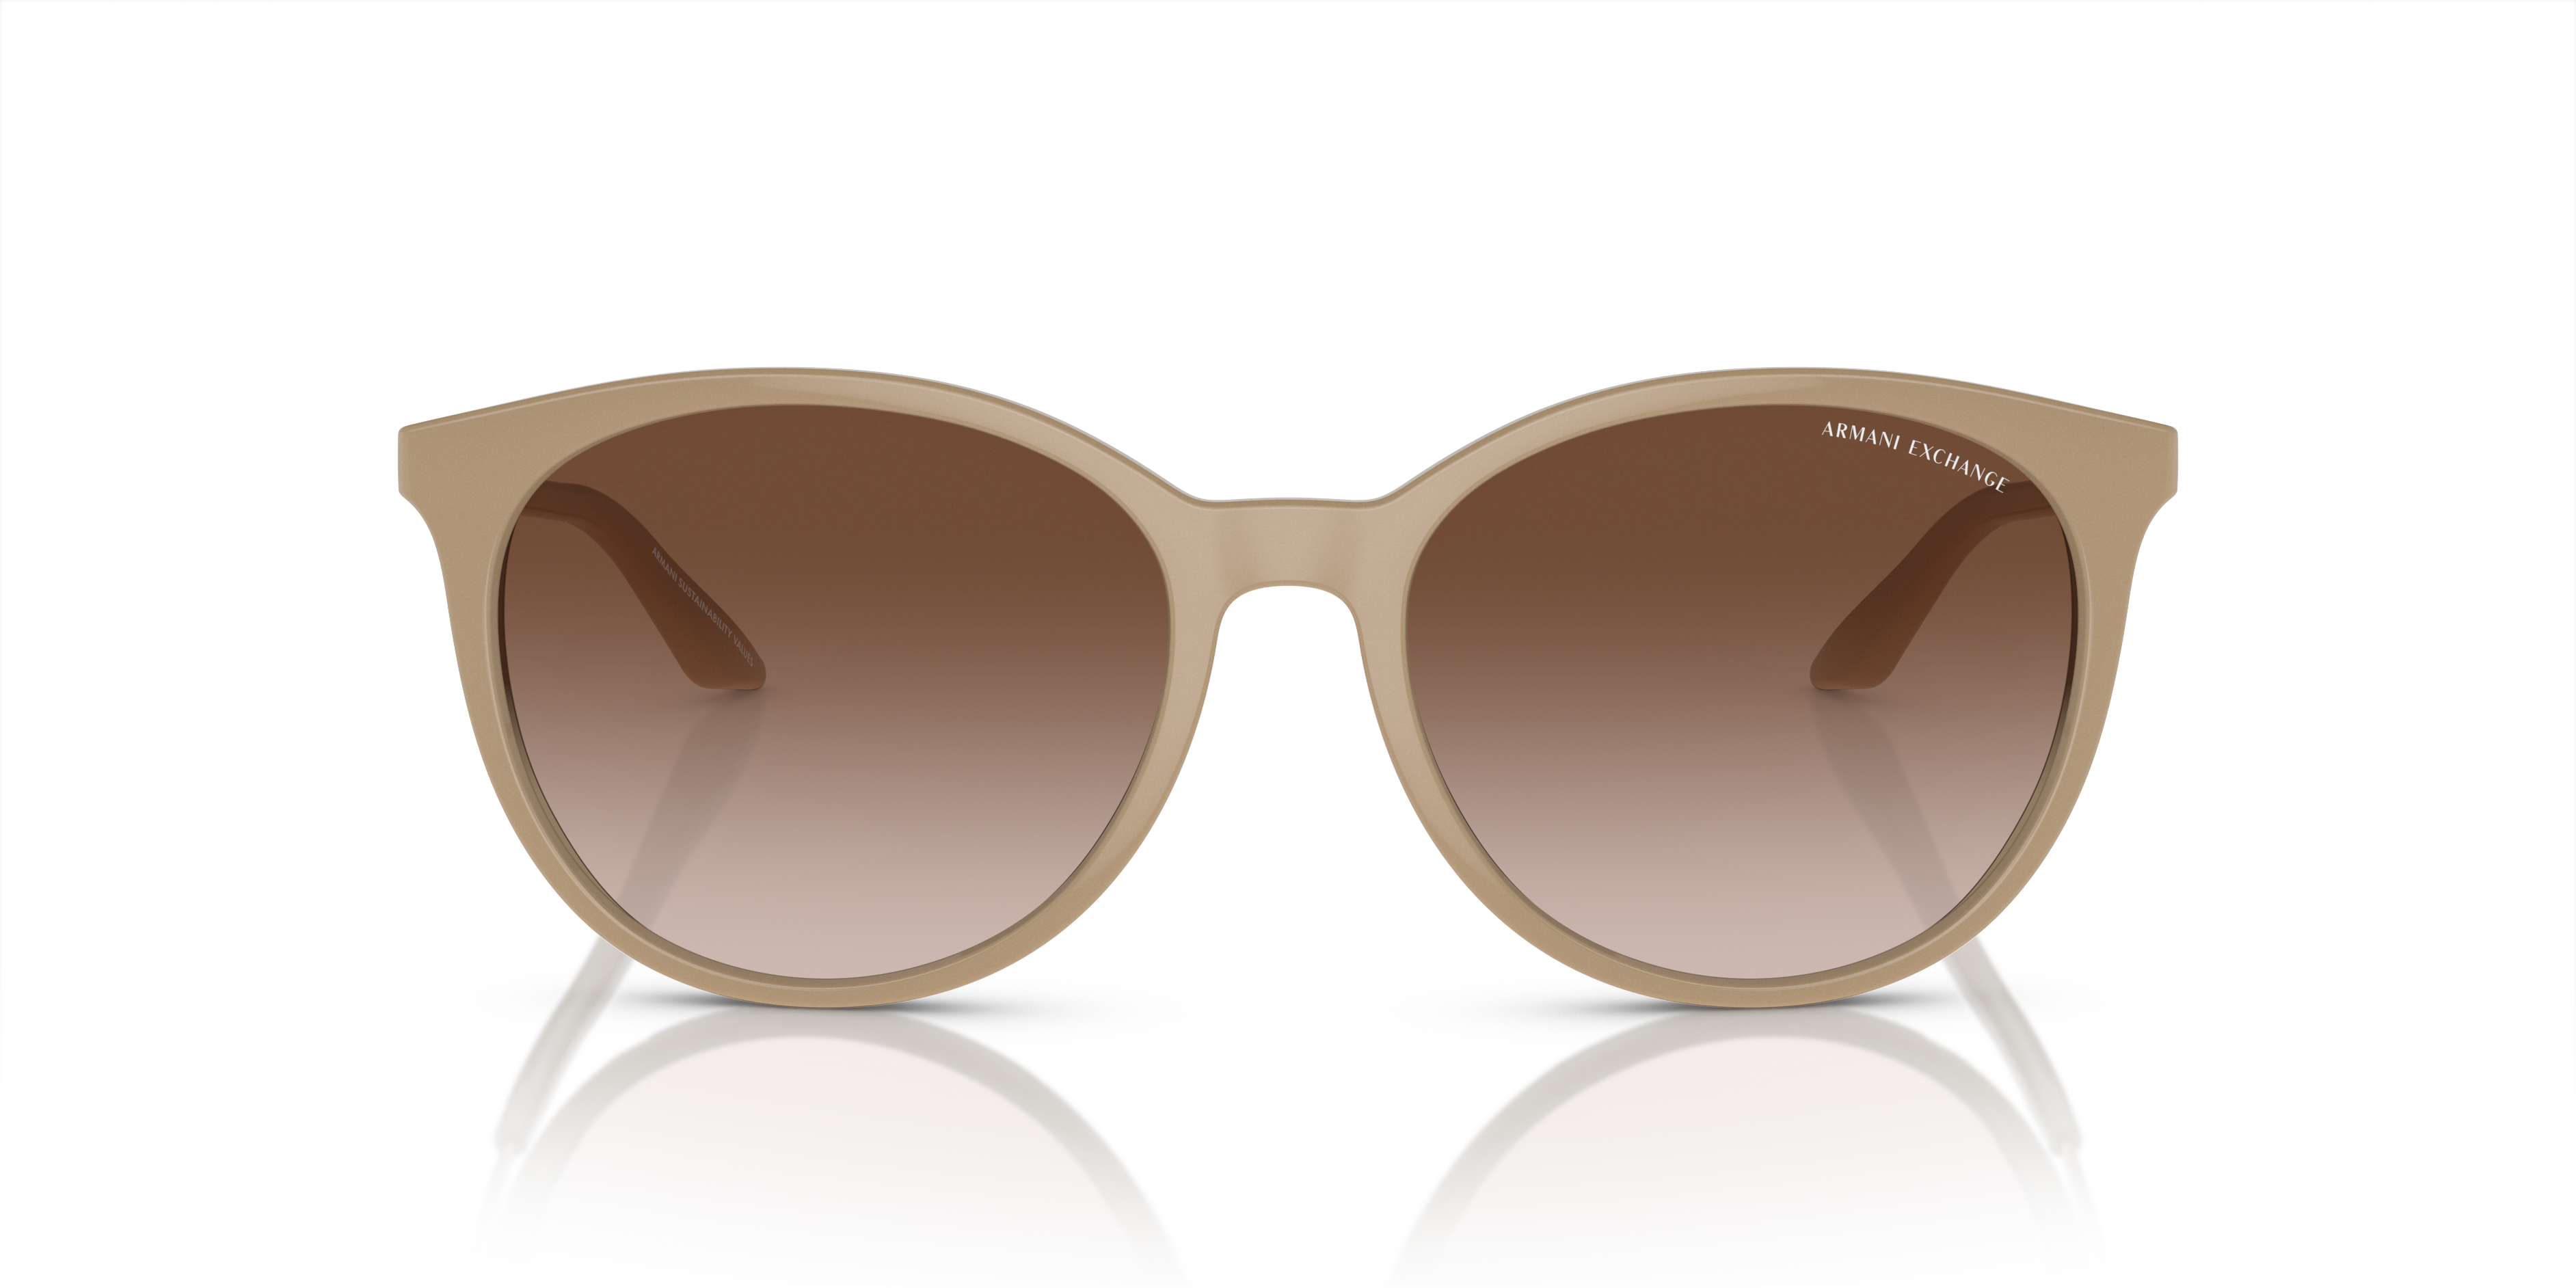 [products.image.front] Armani Exchange AX 4140S Sunglasses